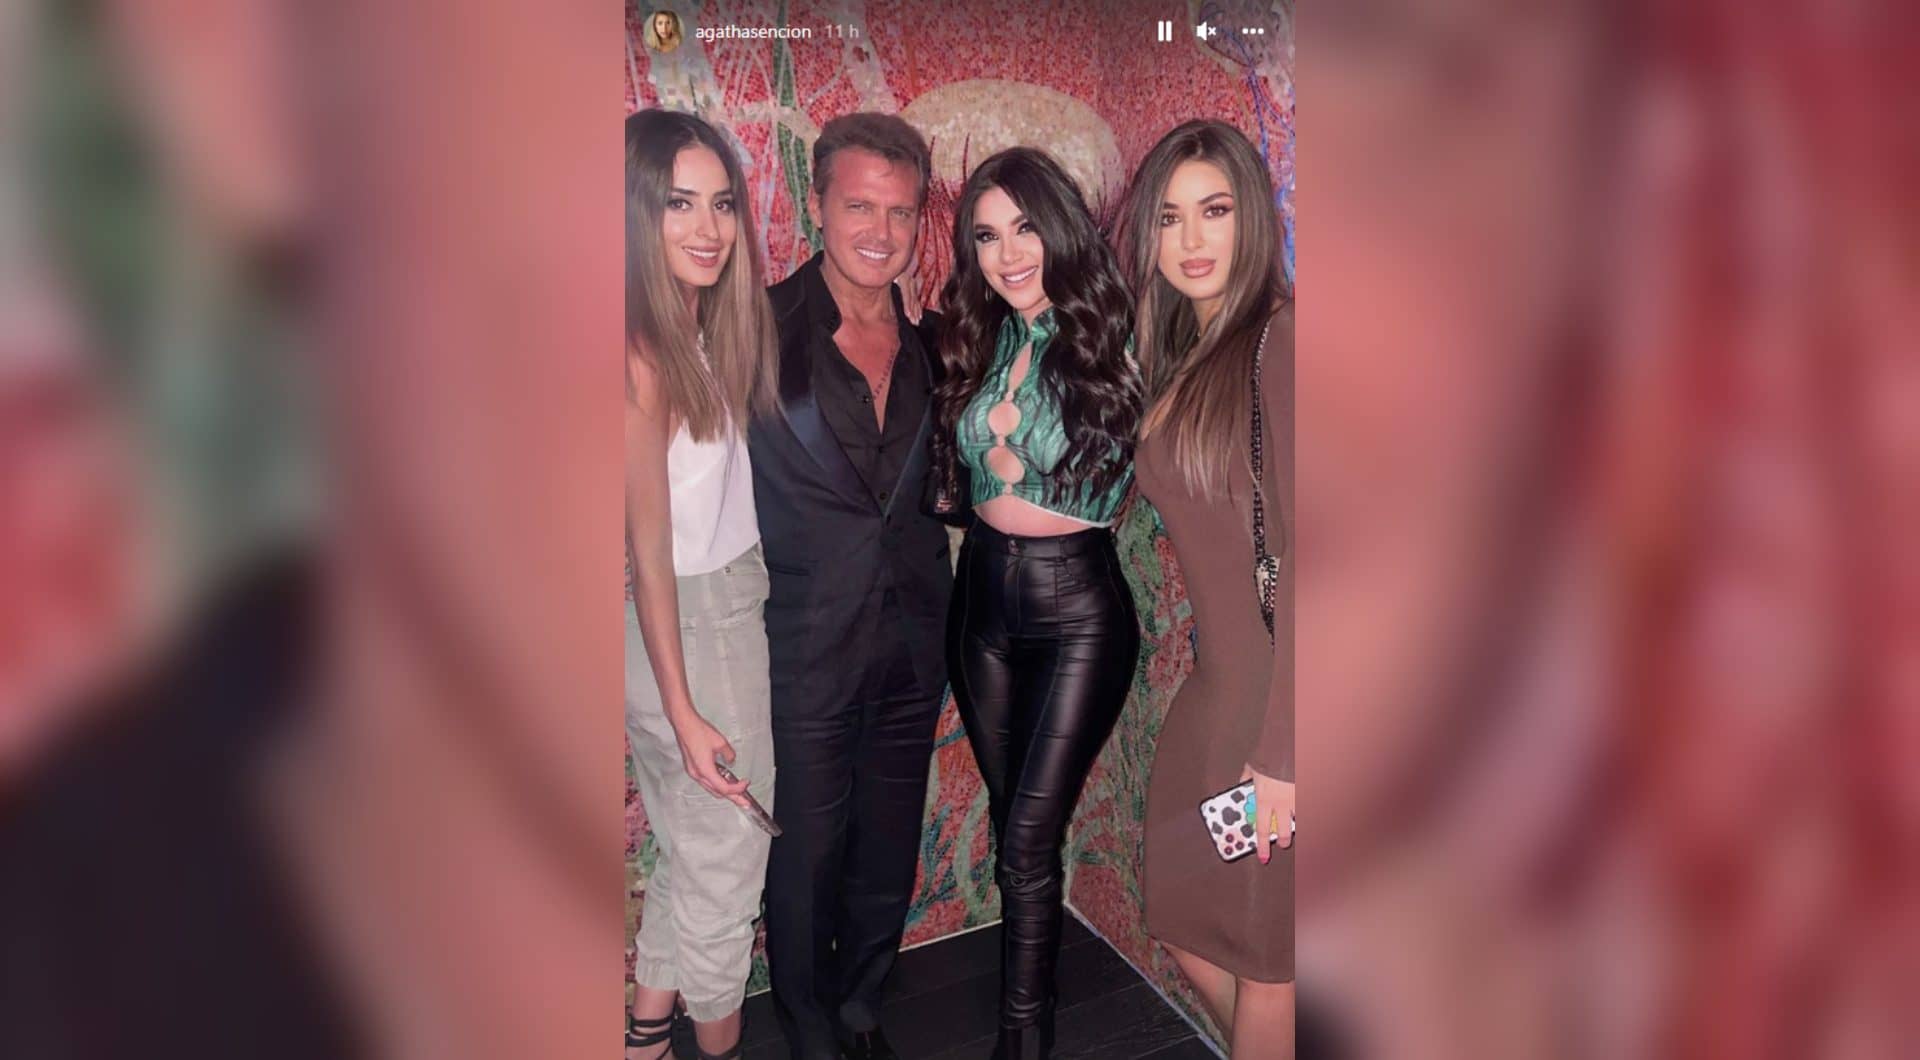 Artists and influencers Niza and beauties LaRache and Agatha Sencion celebrated a birthday party when they chanced upon Luis Miguel at an exclusive restaurant in Miami (Image: Instagram /agathasencion)